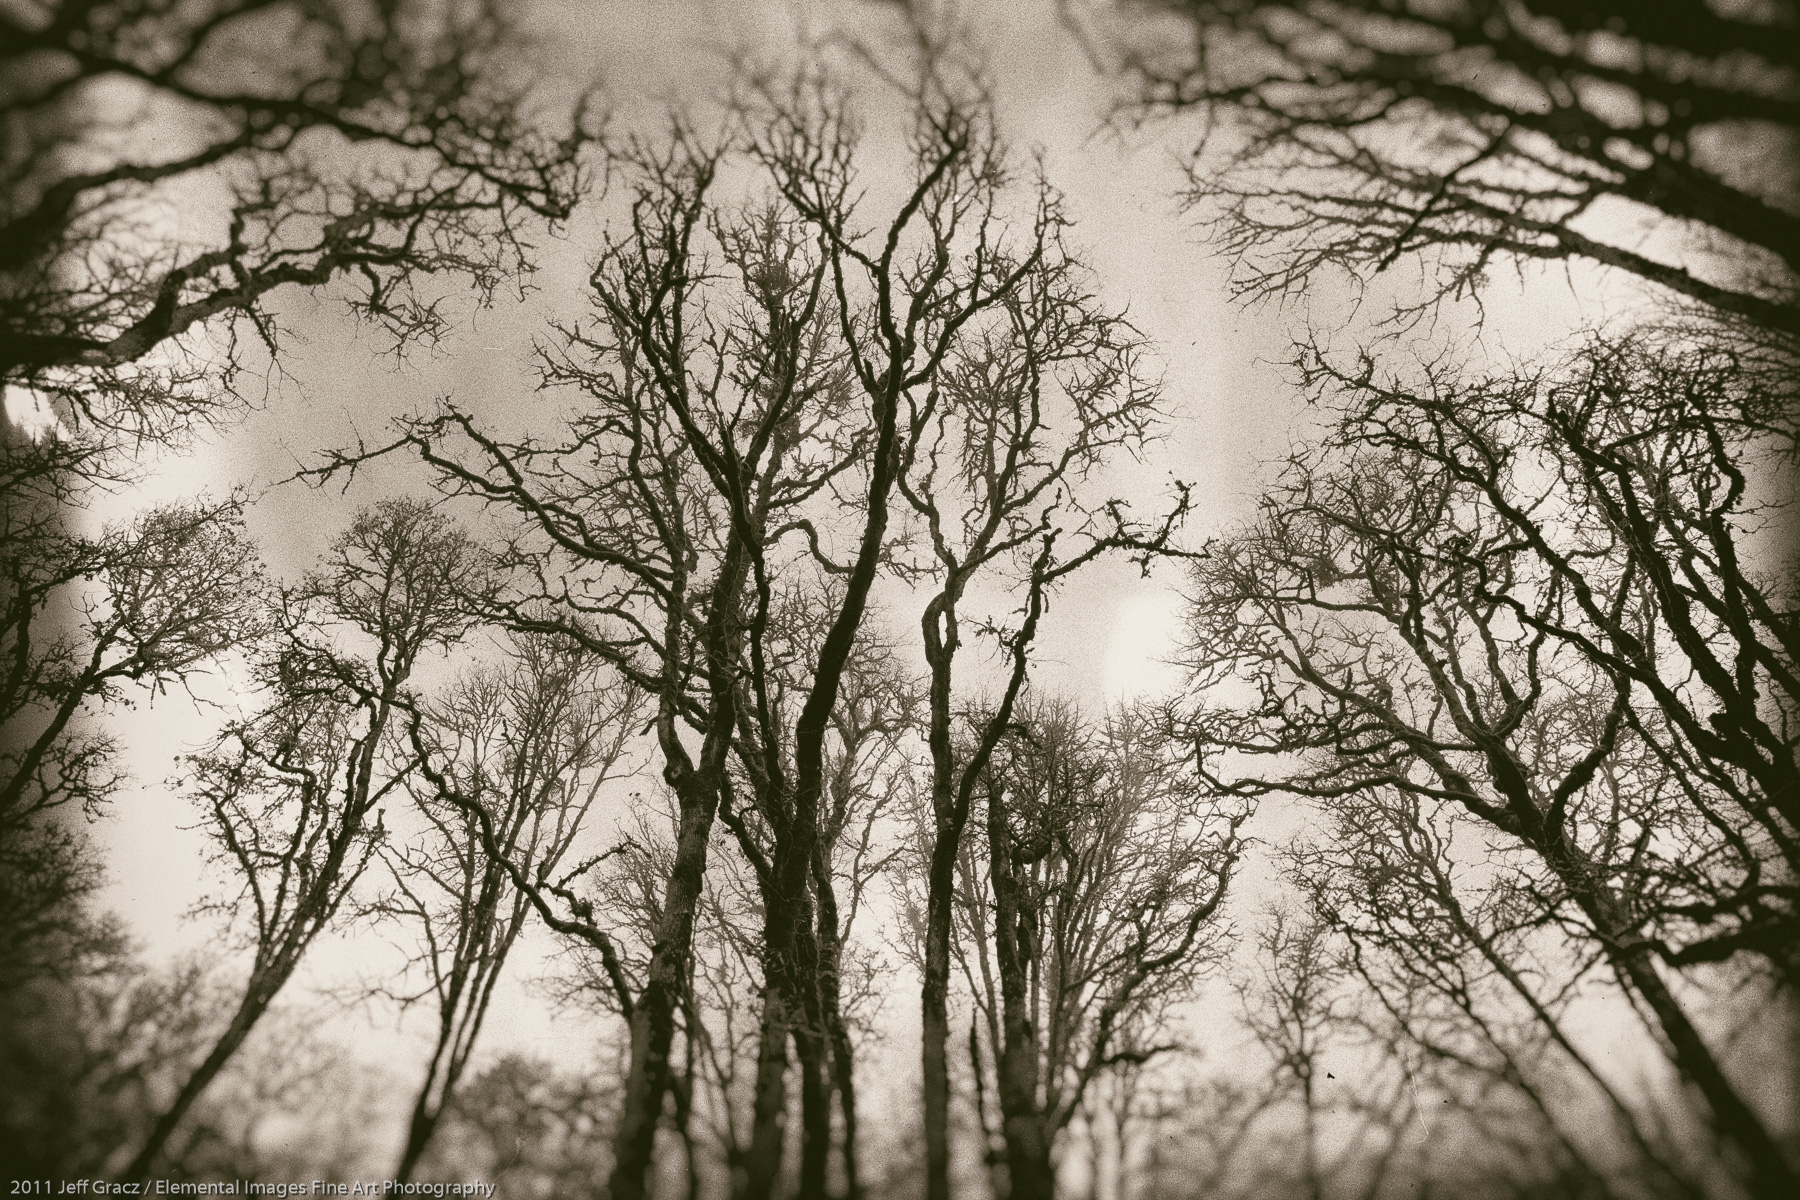 Branches XVI |  | OR | USA - © 2011 Jeff Gracz / Elemental Images Fine Art Photography - All Rights Reserved Worldwide